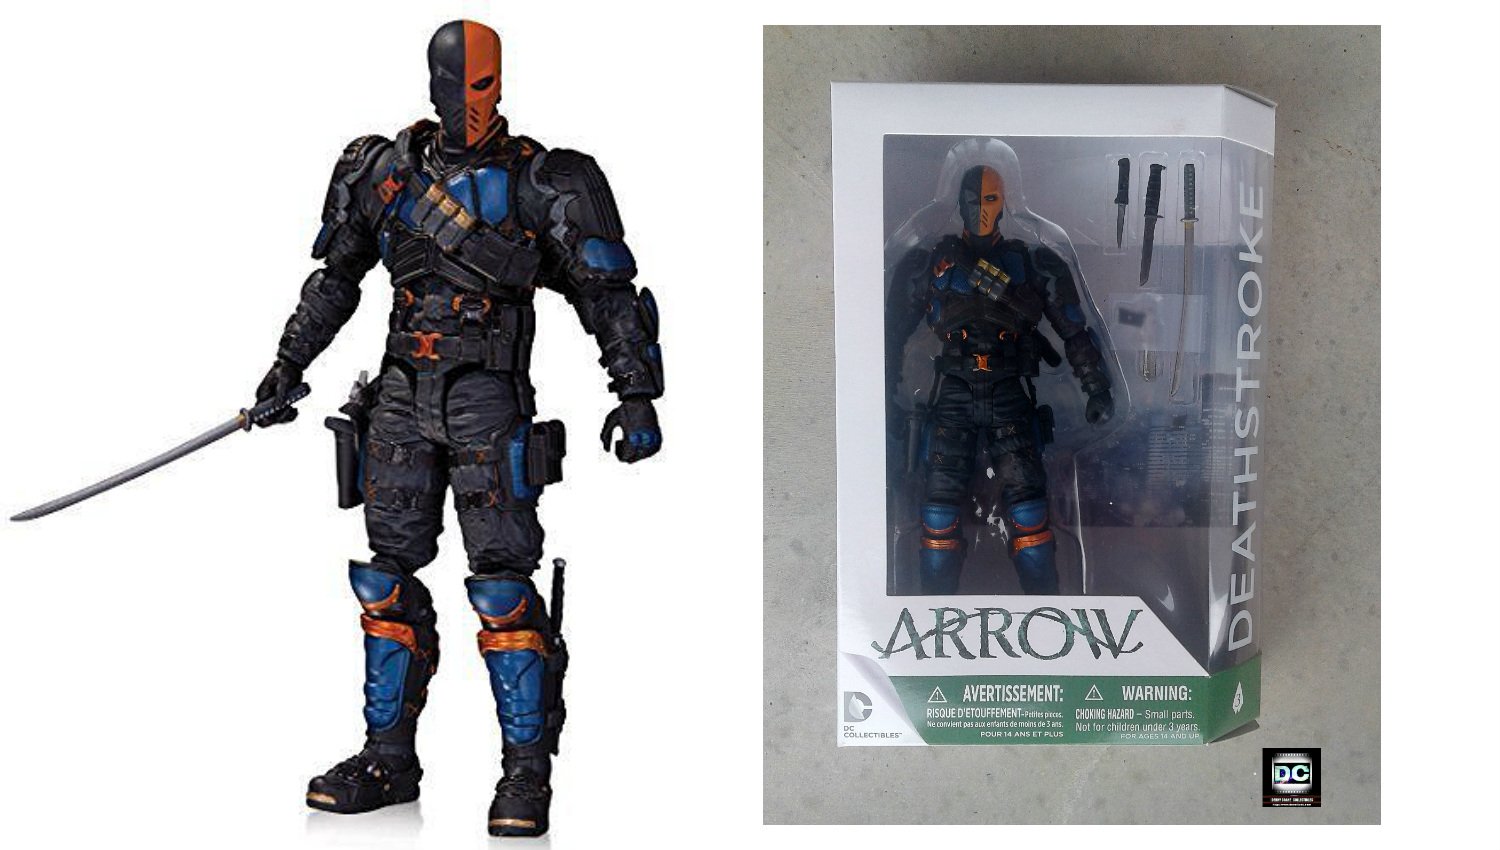 CW Series Arrow #3 Deathstroke 2015 DC Direct Collectible Action Figure Gentle Giant Manu Bennett